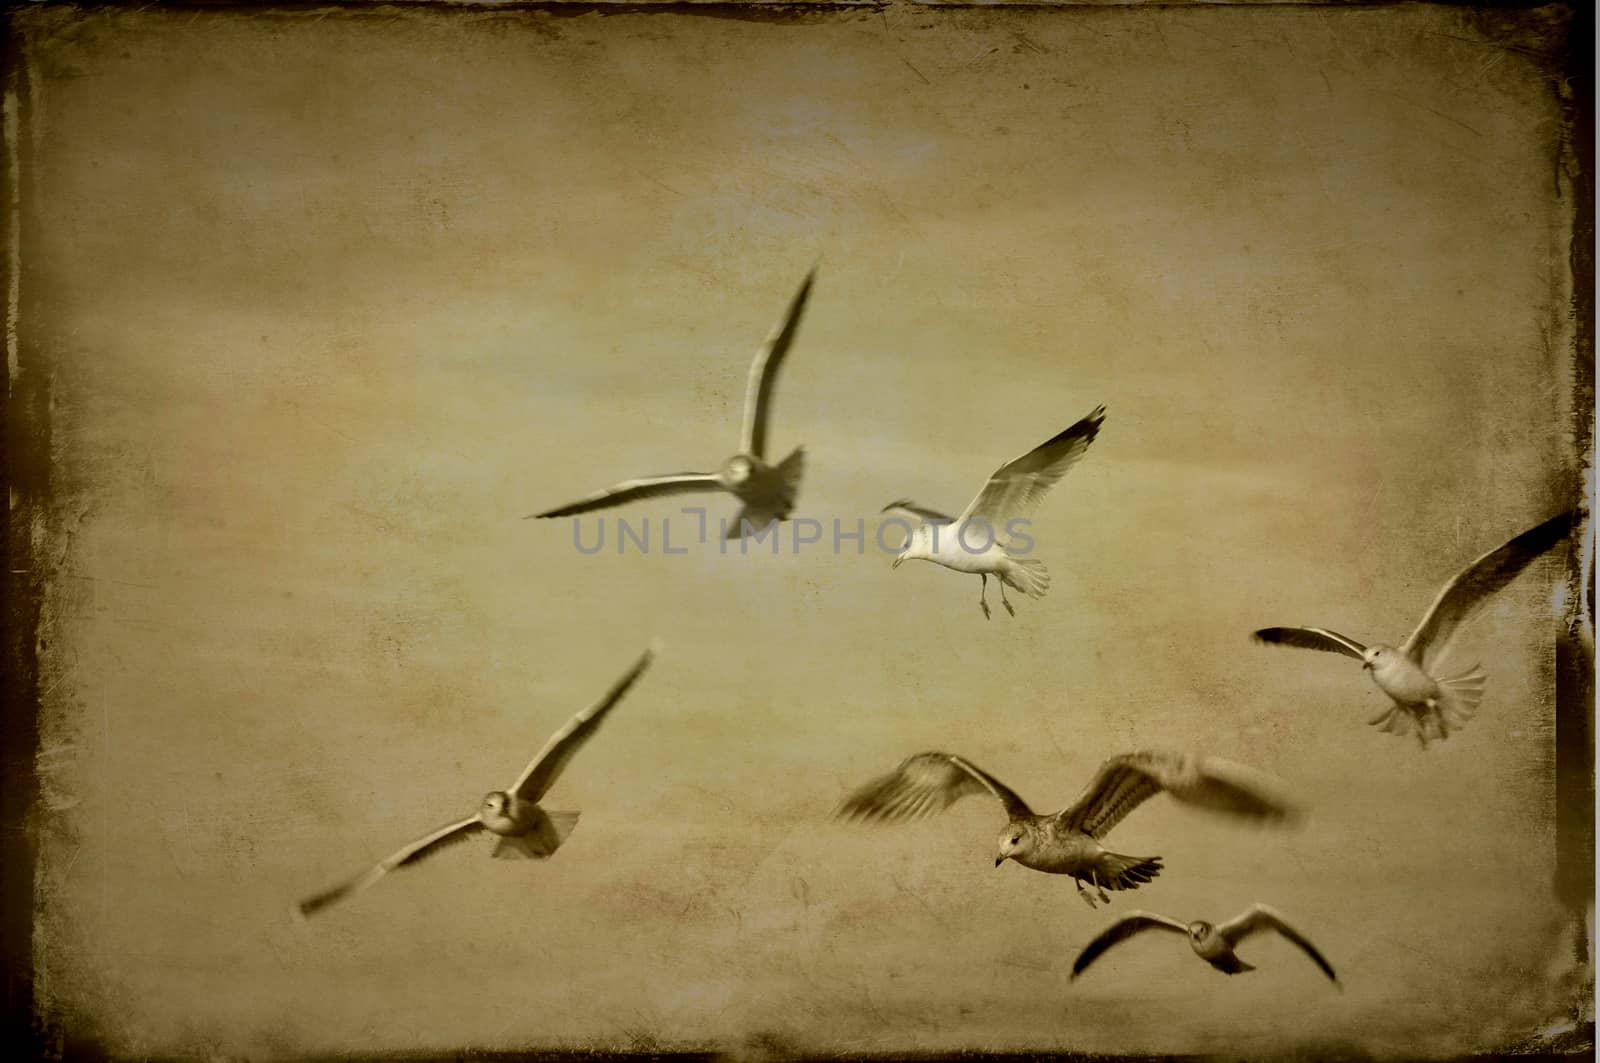 Seagulls in sepia, freedom in the sky.